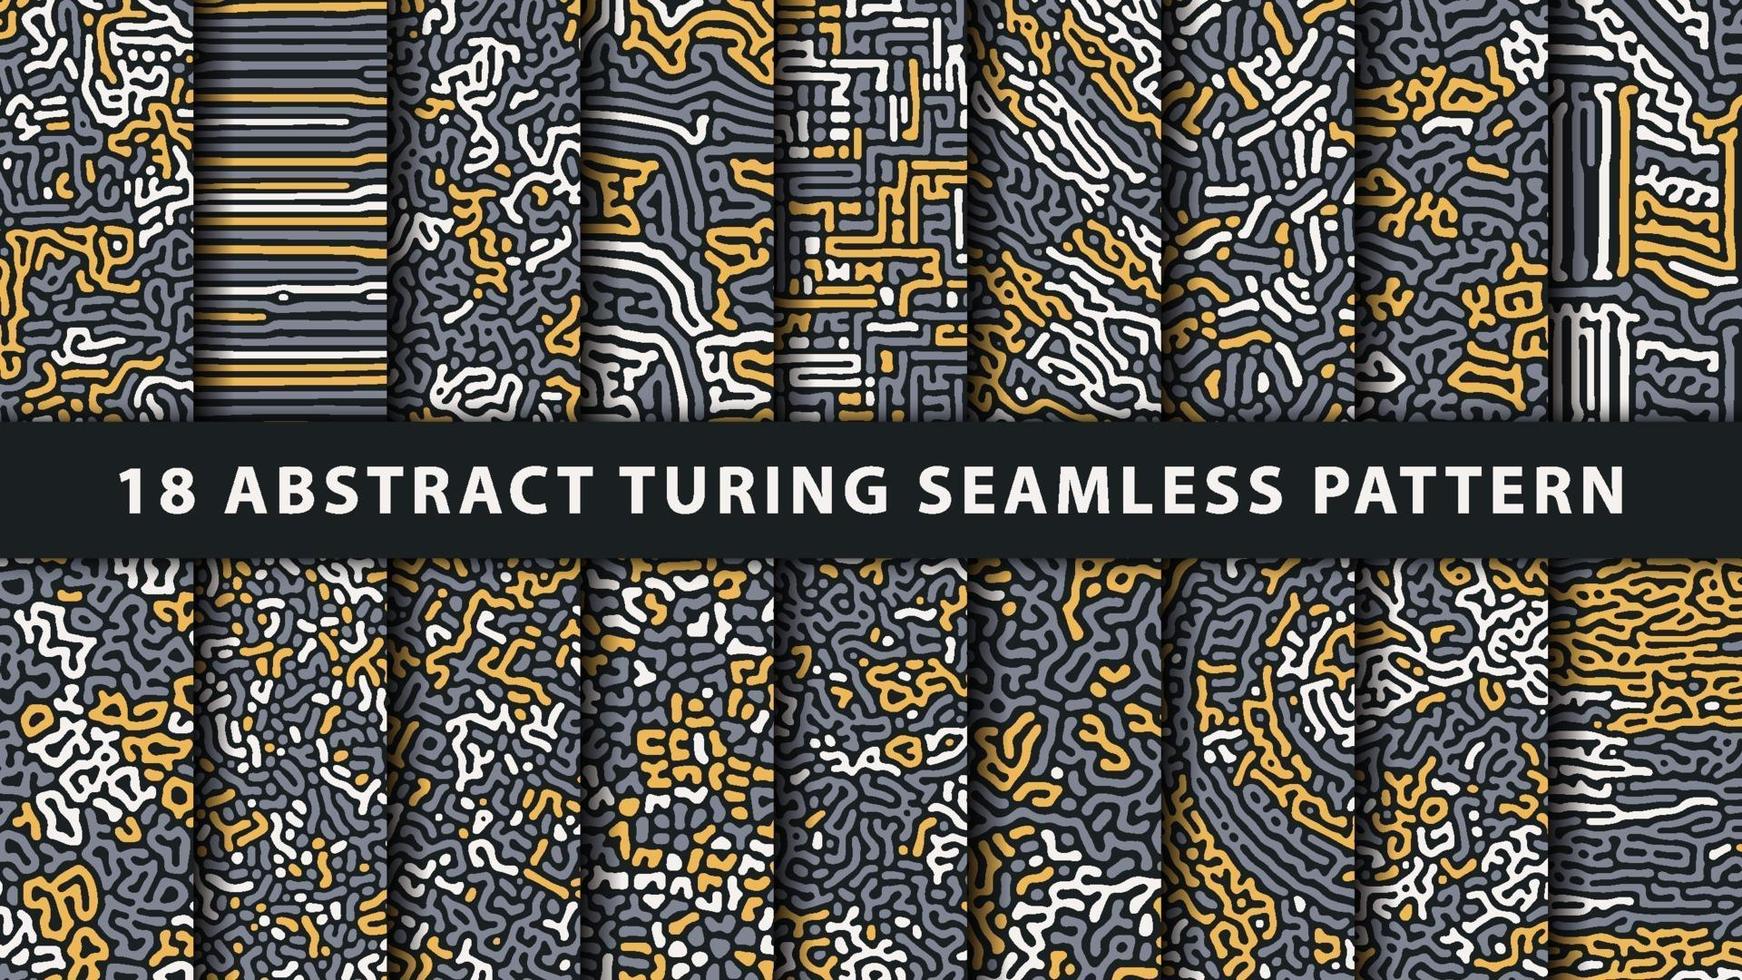 Collection of turing abstract seamless pattern. Premium Vector